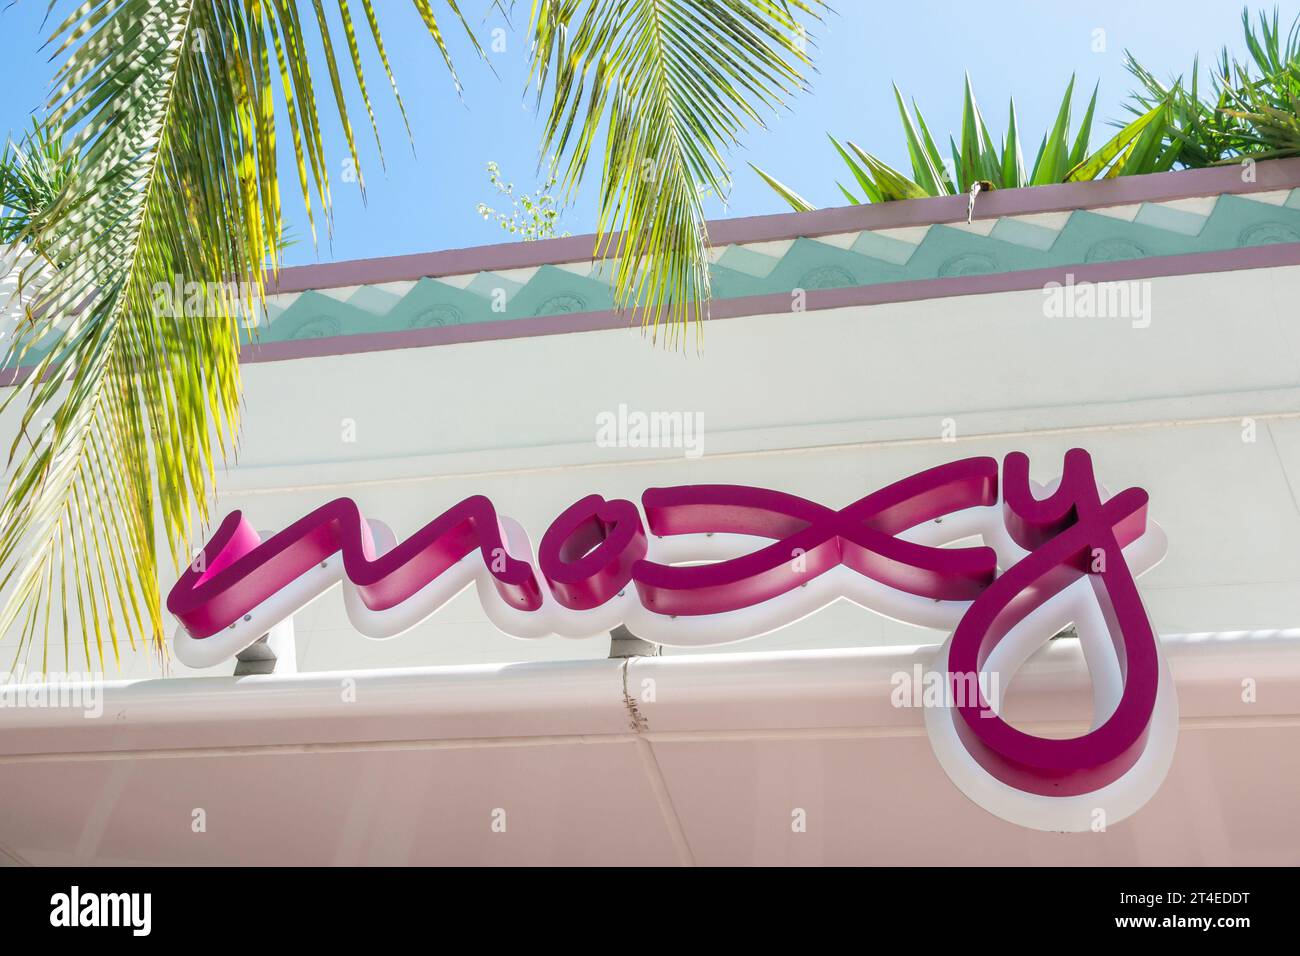 Miami Beach Florida,outside exterior,building front entrance hotel,Moxy Miami South Beach sign,hotels motels businesses Stock Photo